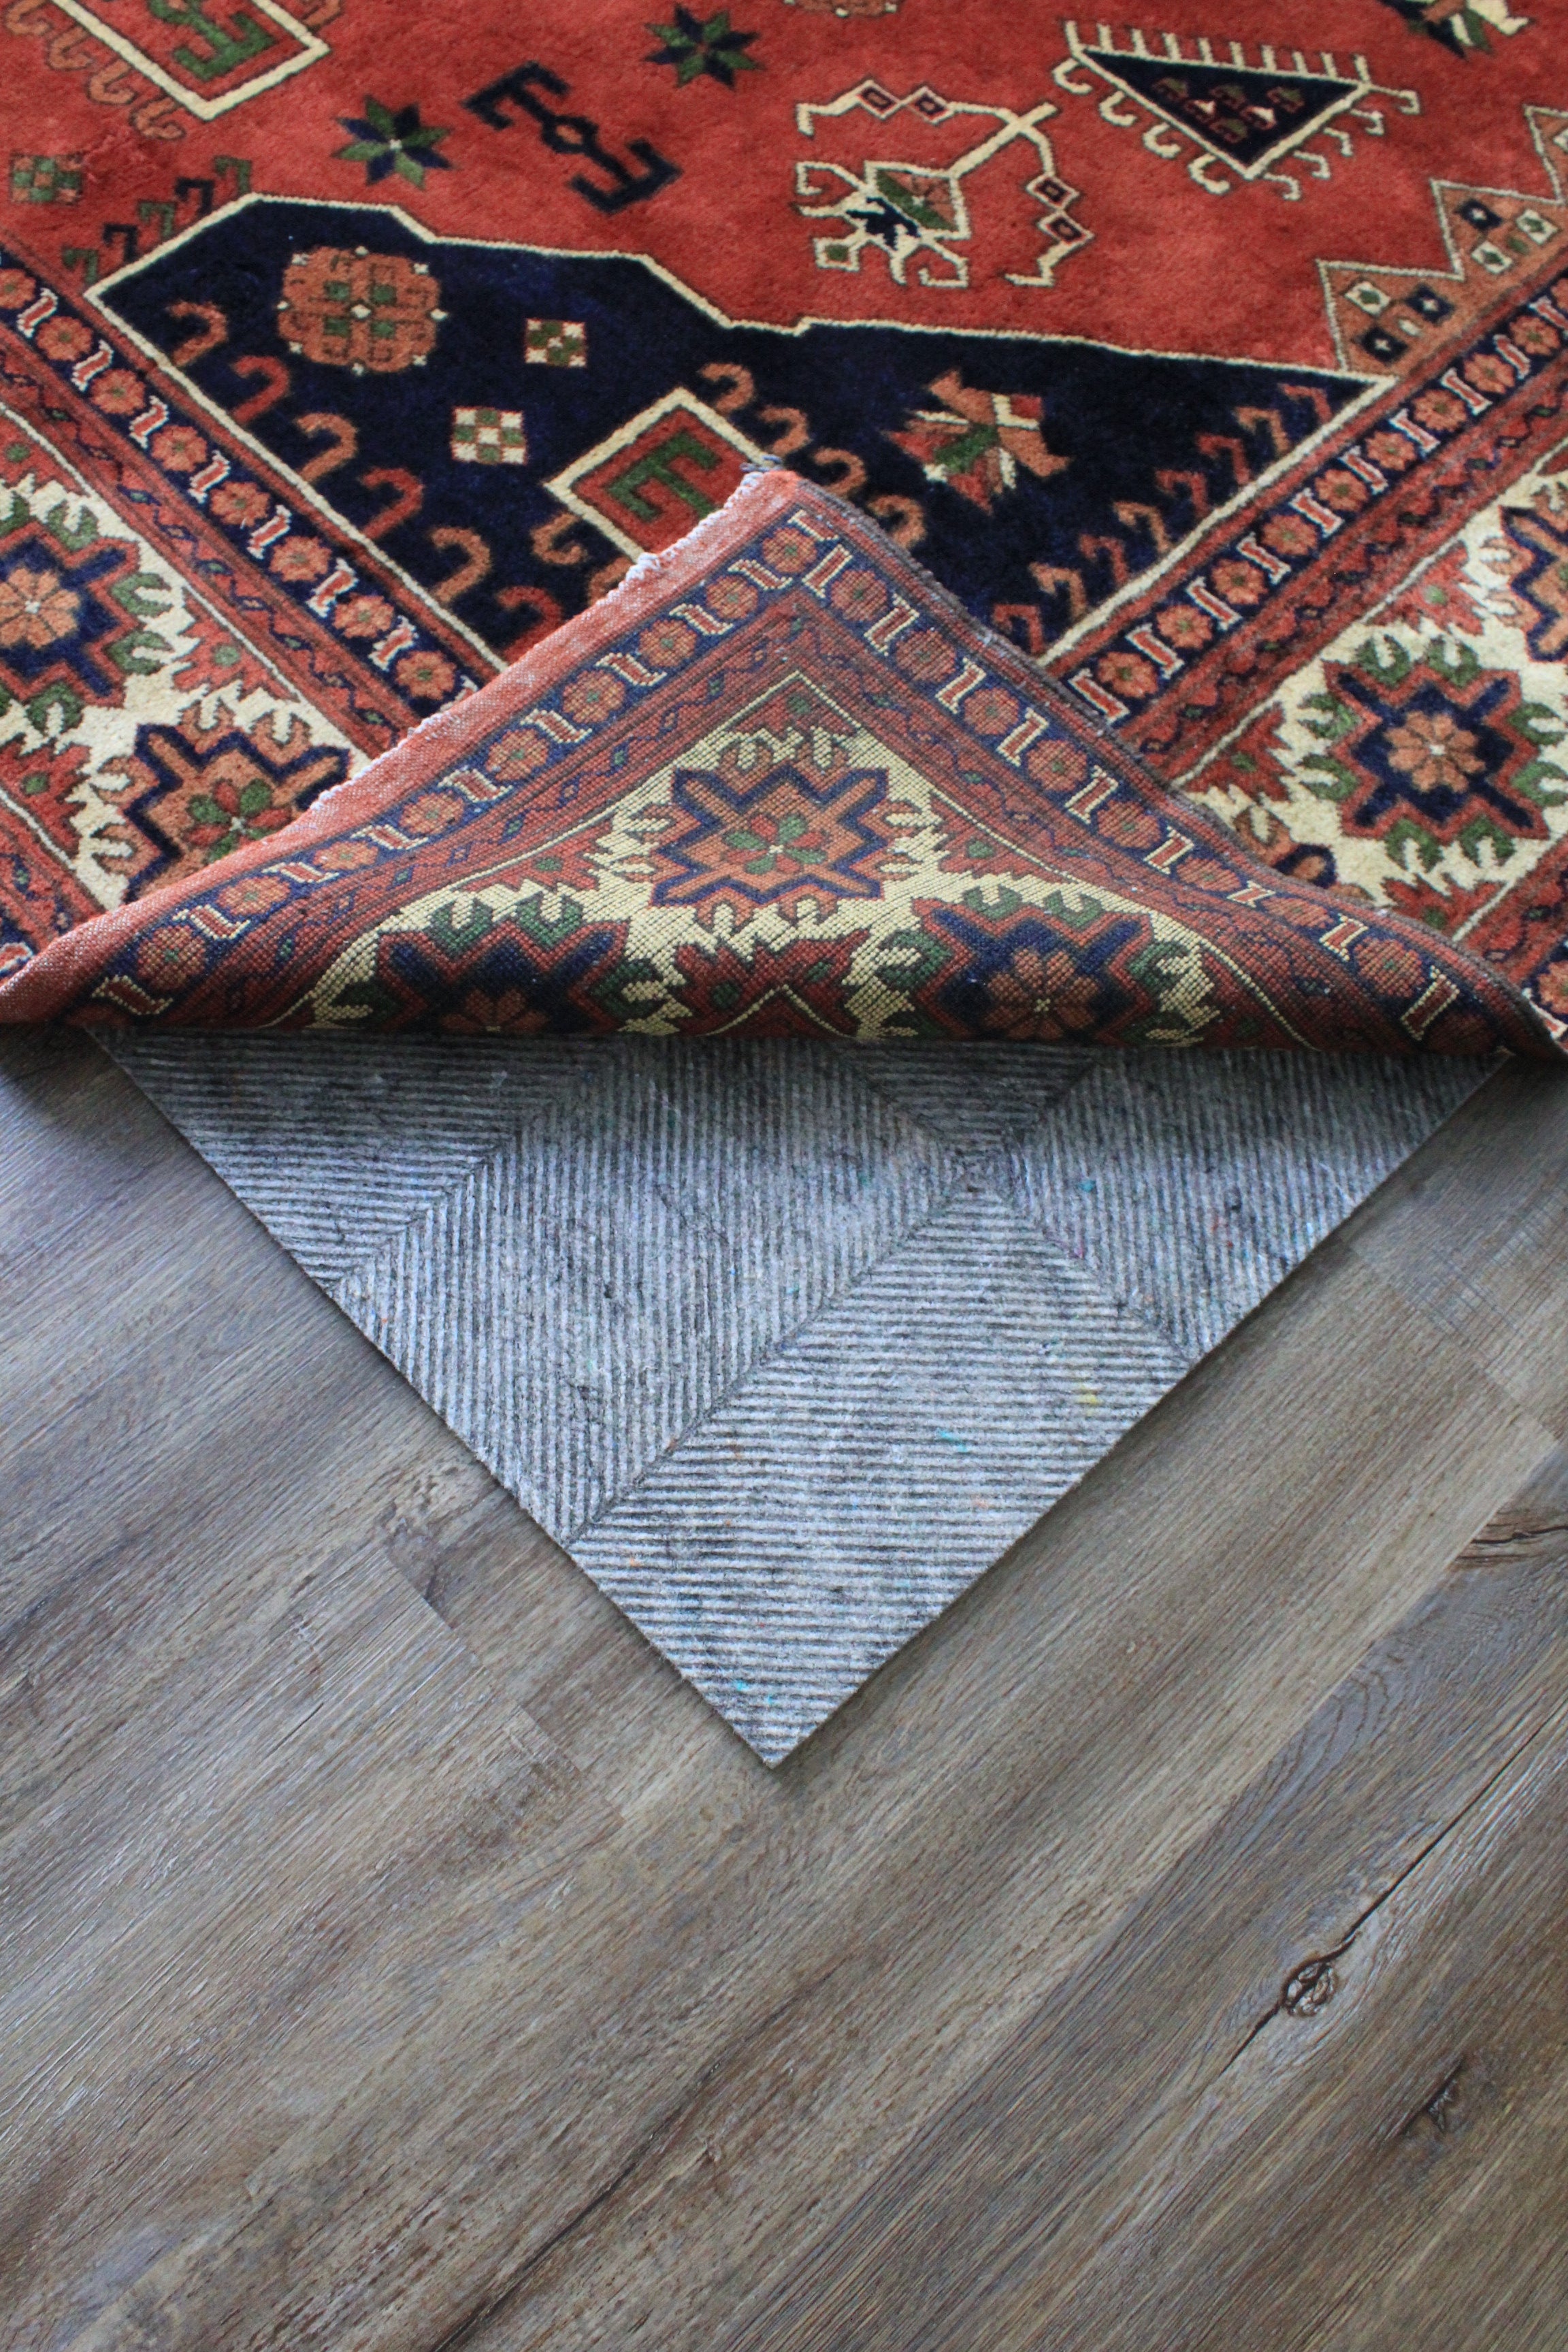 Rug Pads for Hardwood Floors in DFW